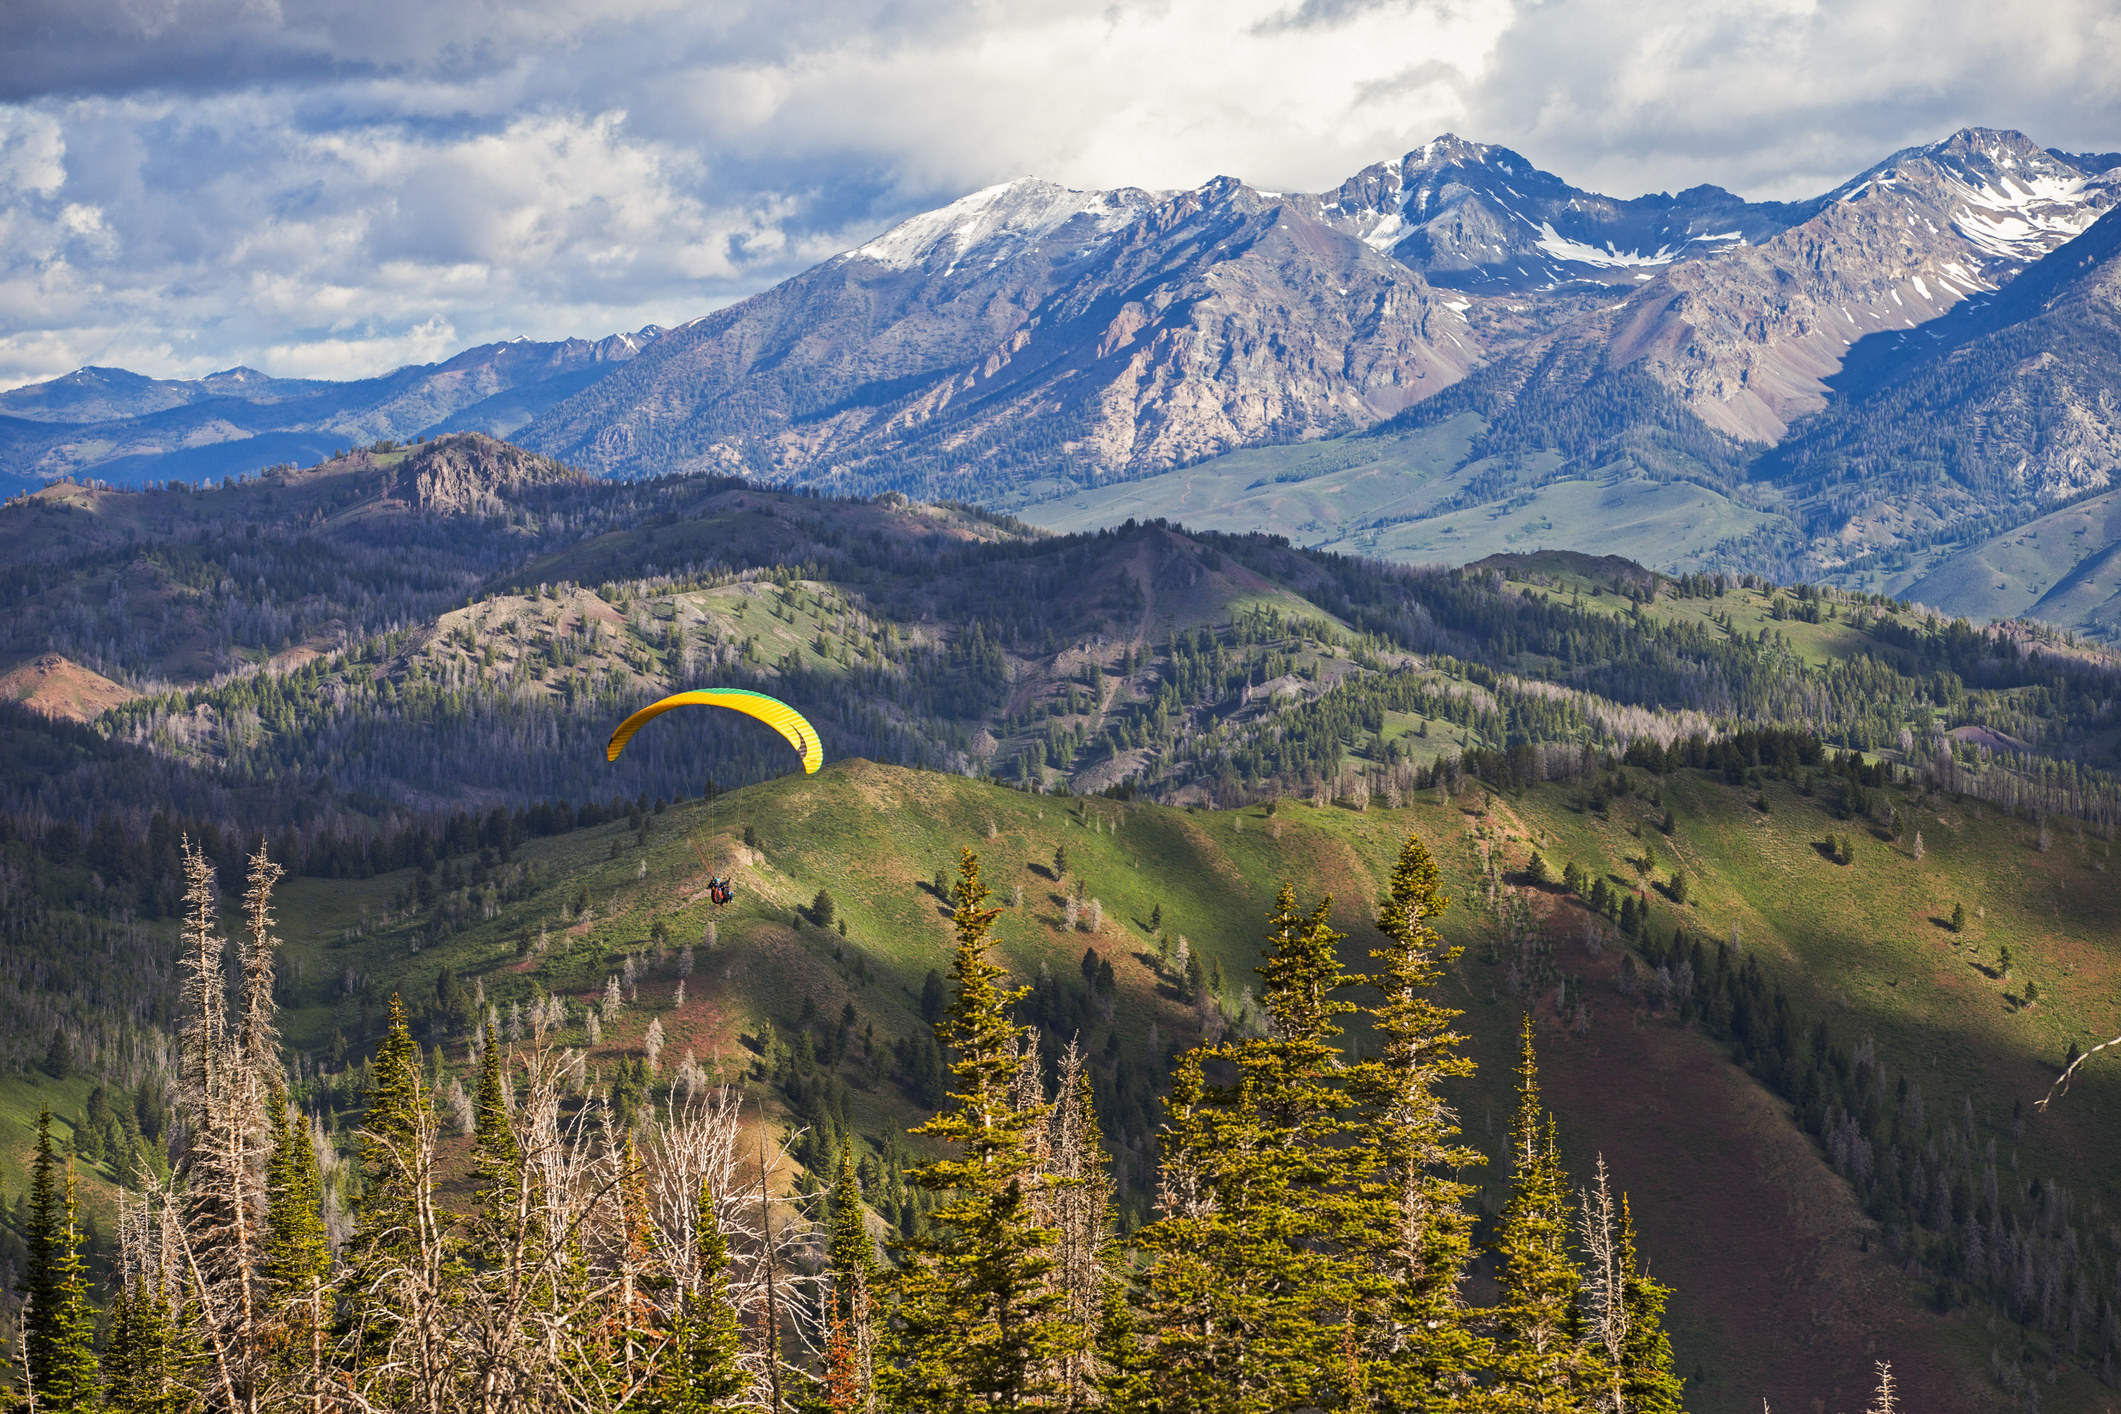 A person paragliding in Sun Valley.